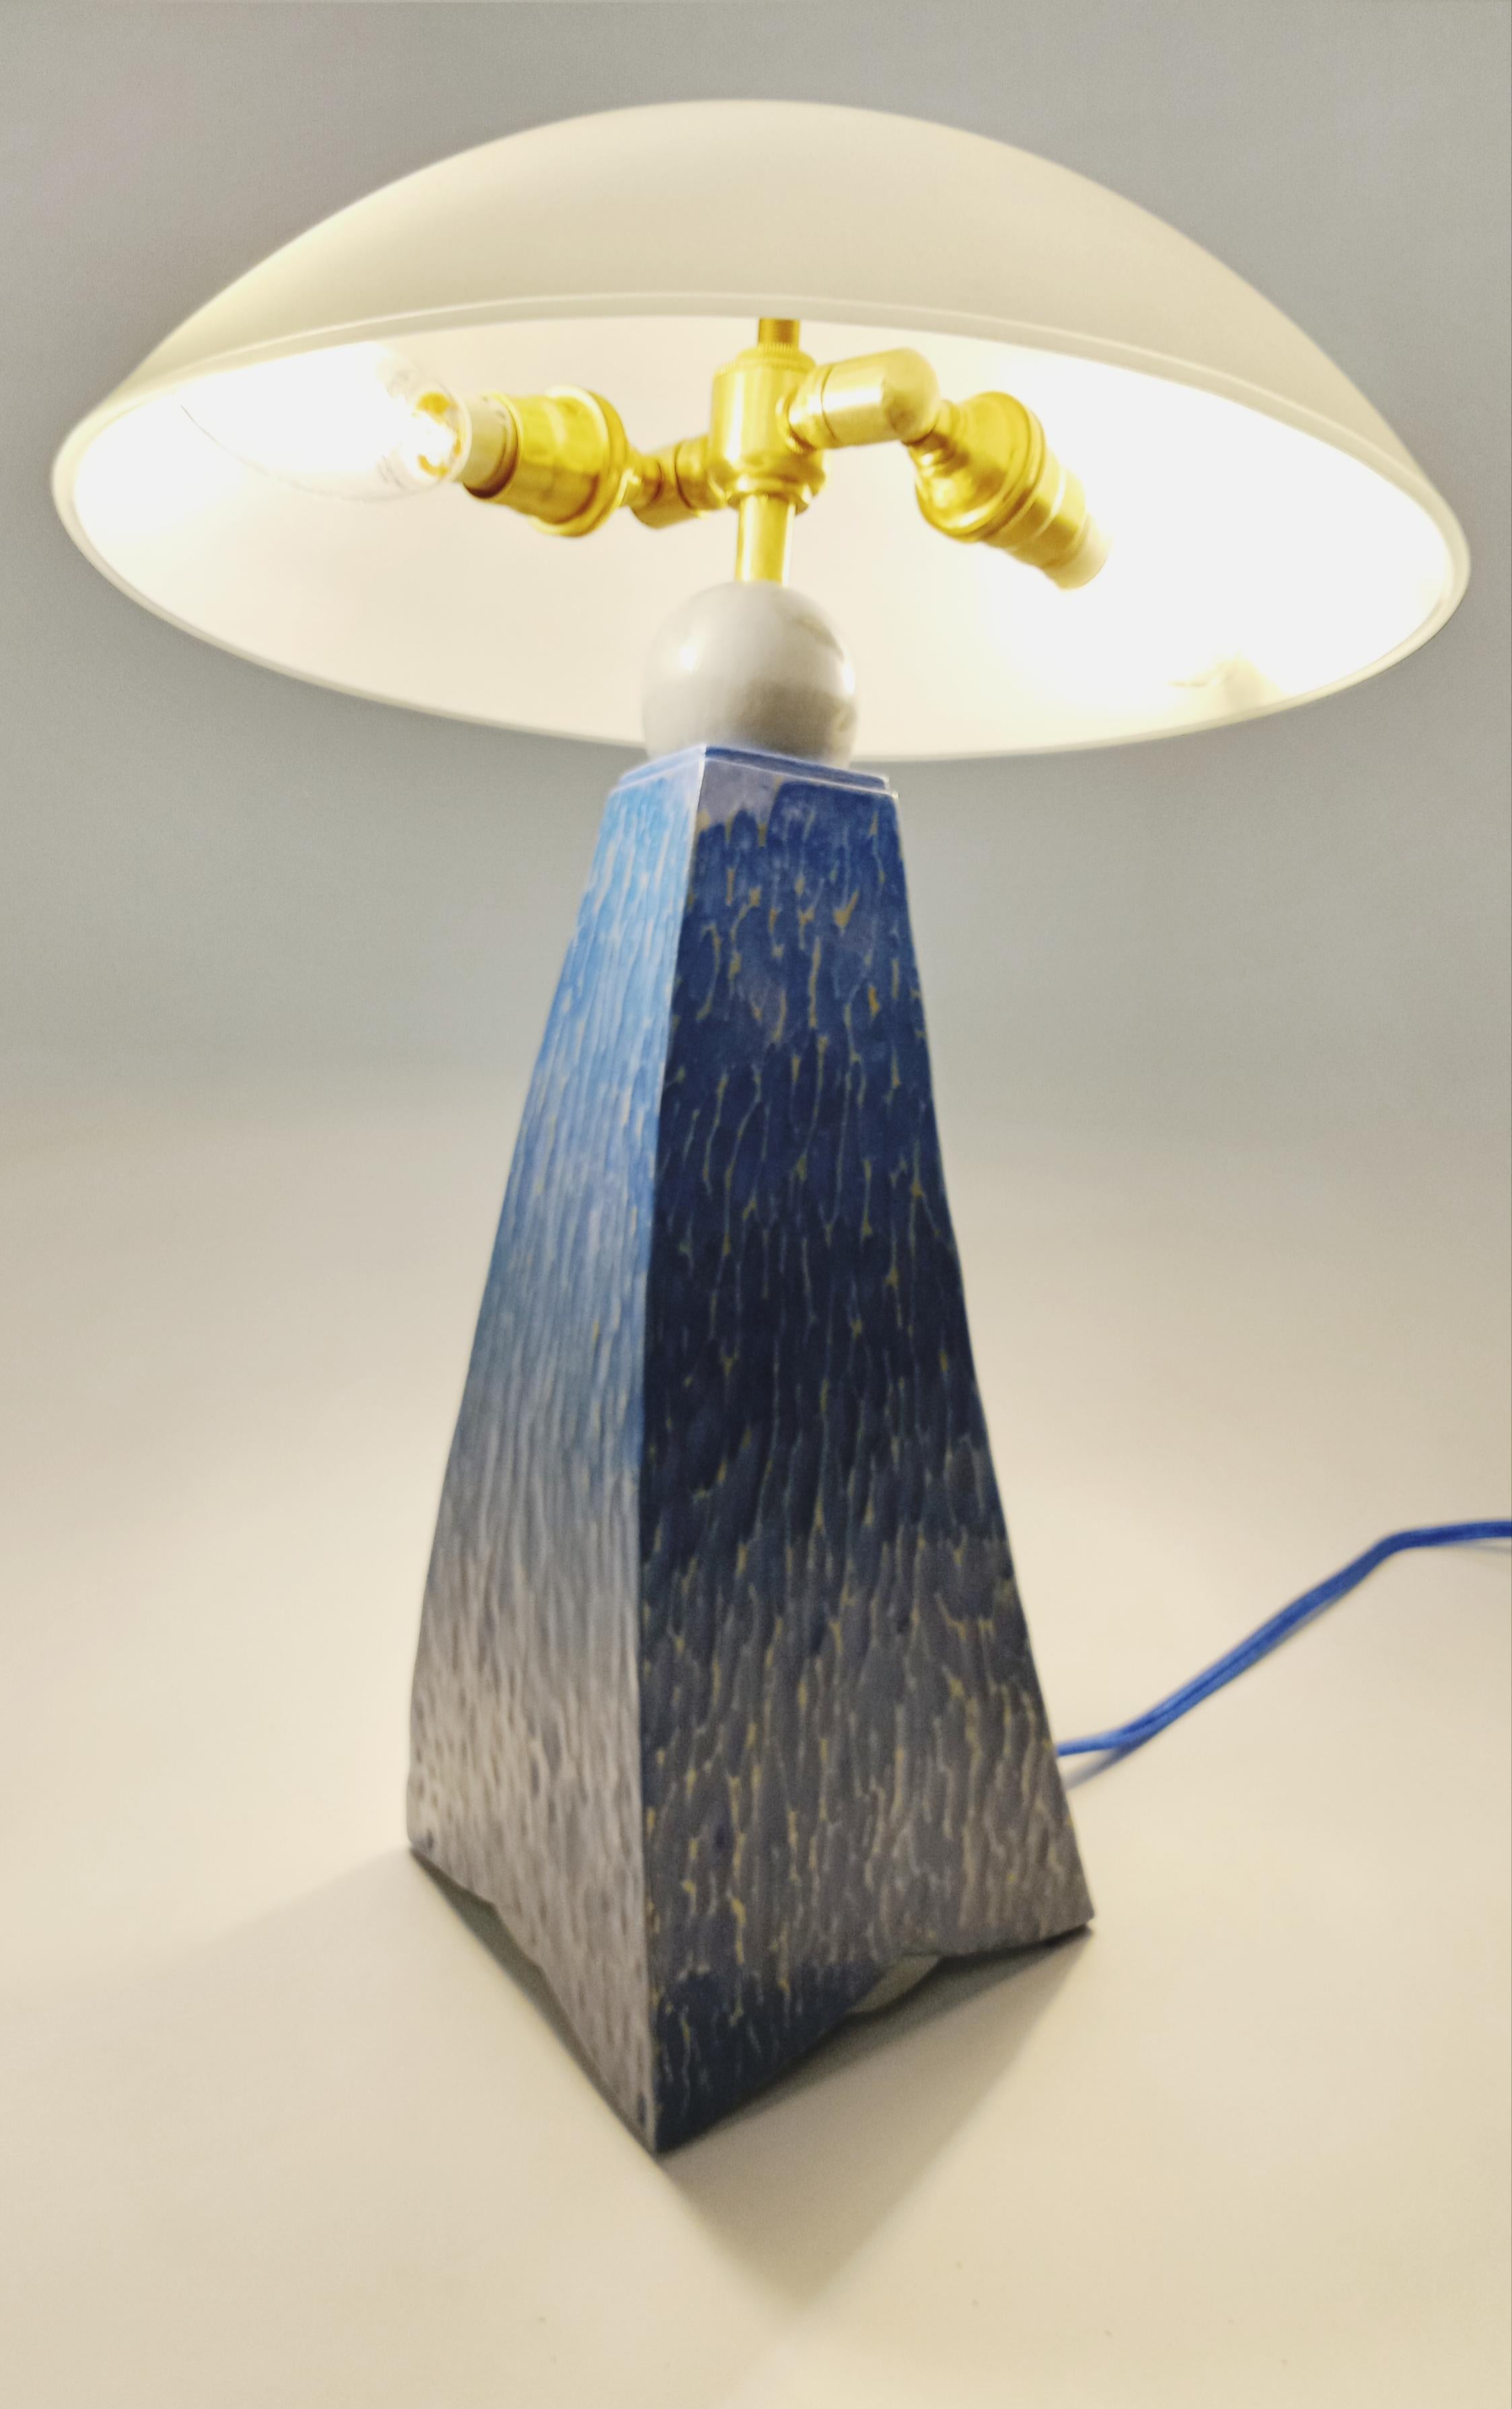 Illuminate your space with the soulful rhythm of Jazz Inspired Lamp II Mini textured and milk painted variation. embodied in our captivating creation - the Jazz Inspired Lamp II. This bespoke piece is a harmonious marriage of artistic expression and